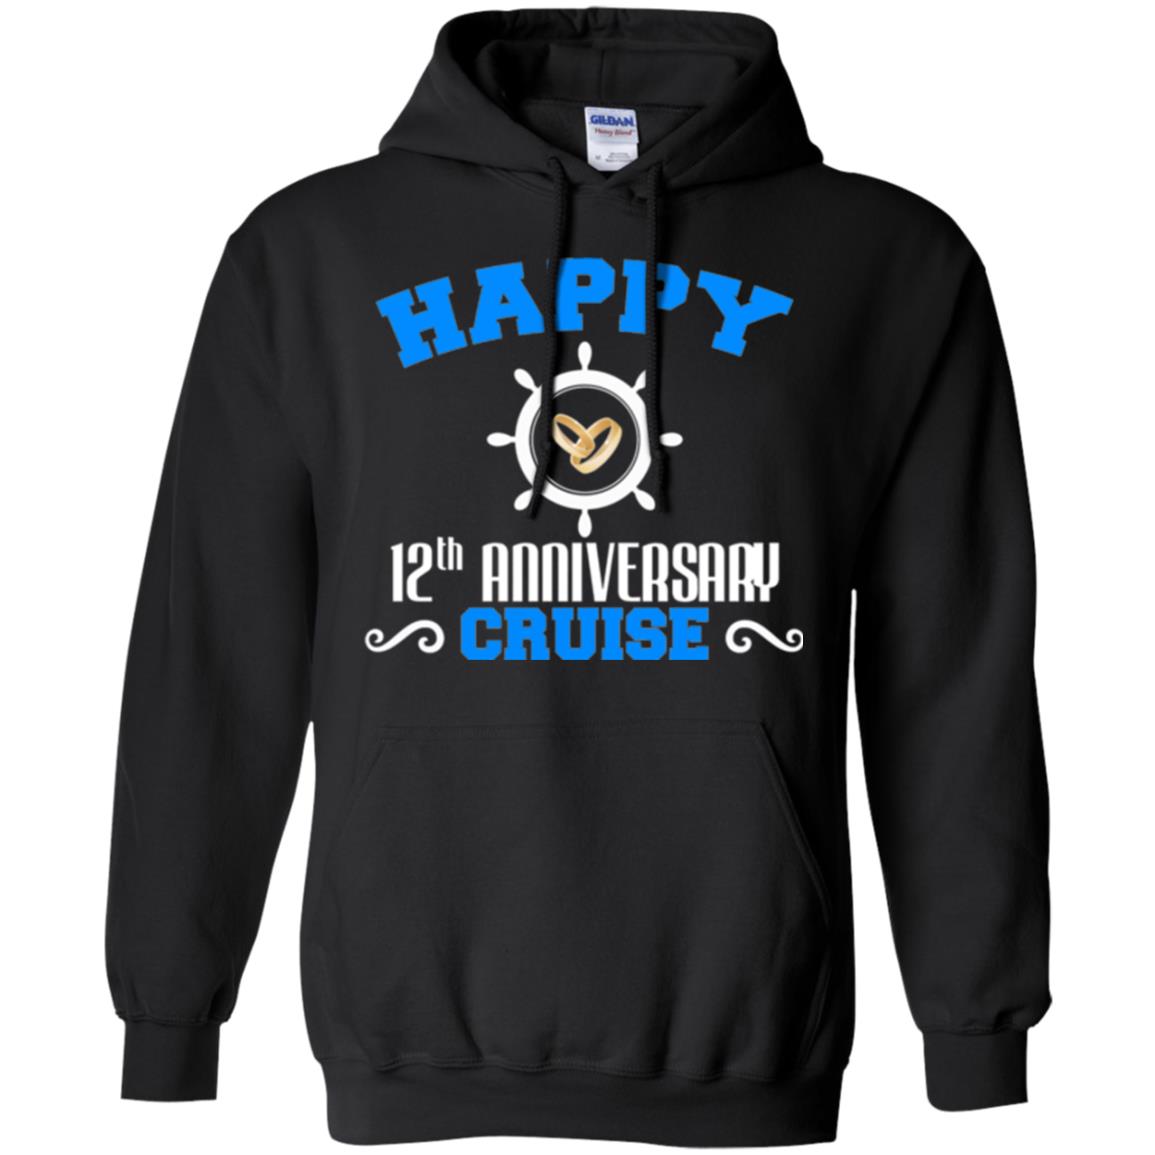 12th Anniversary T-shirt For Cruise Lover Gift For Couple